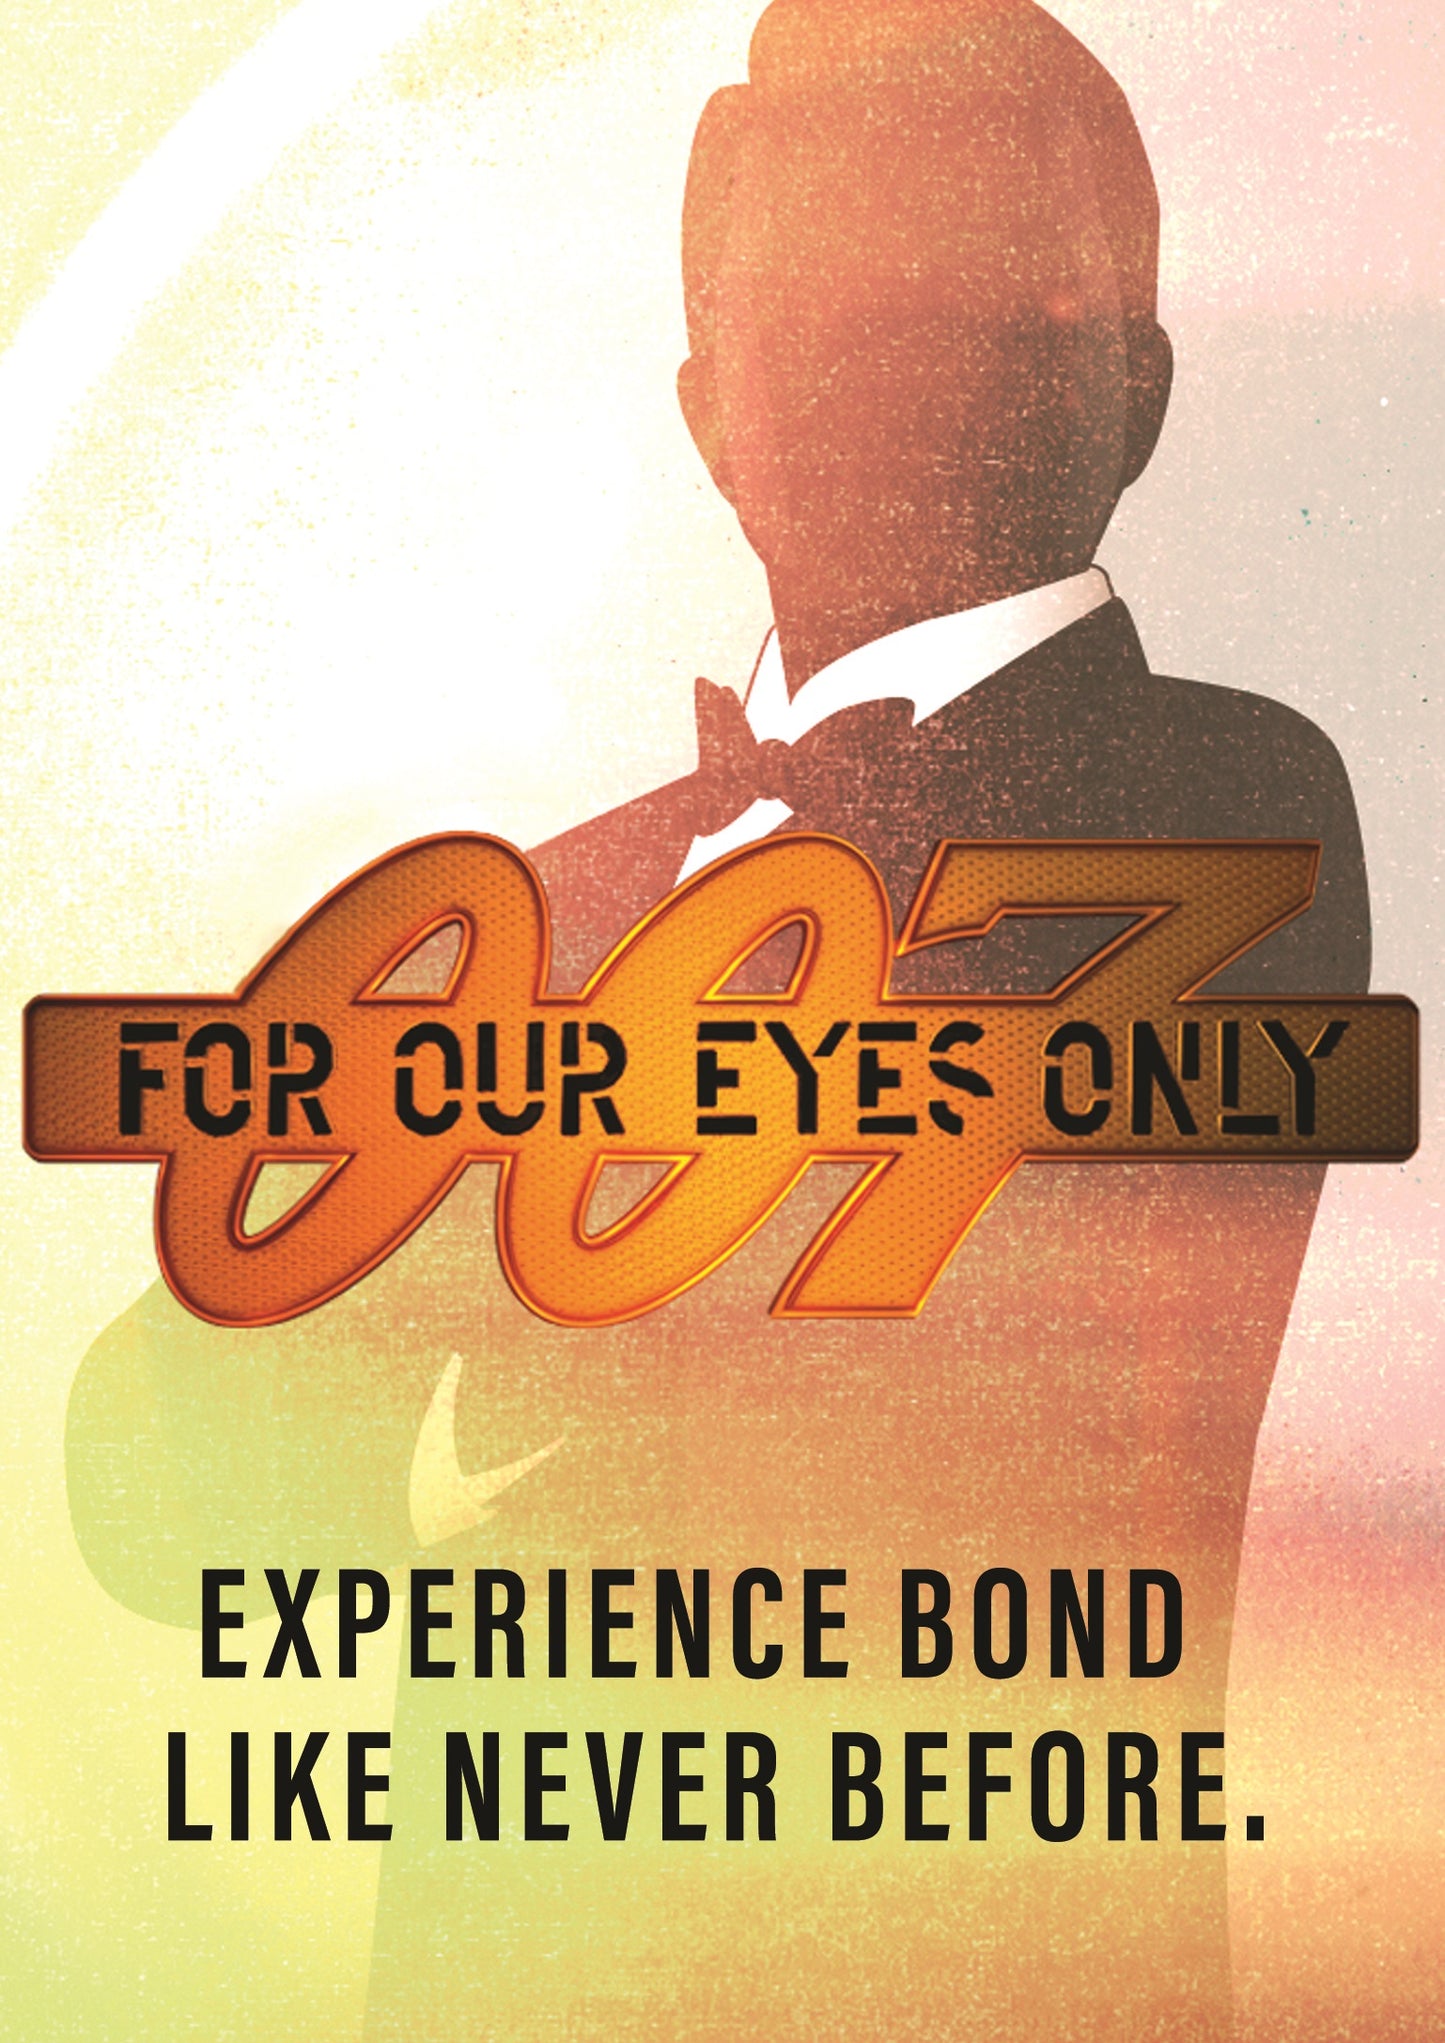 007: For Our Eyes Only cover art